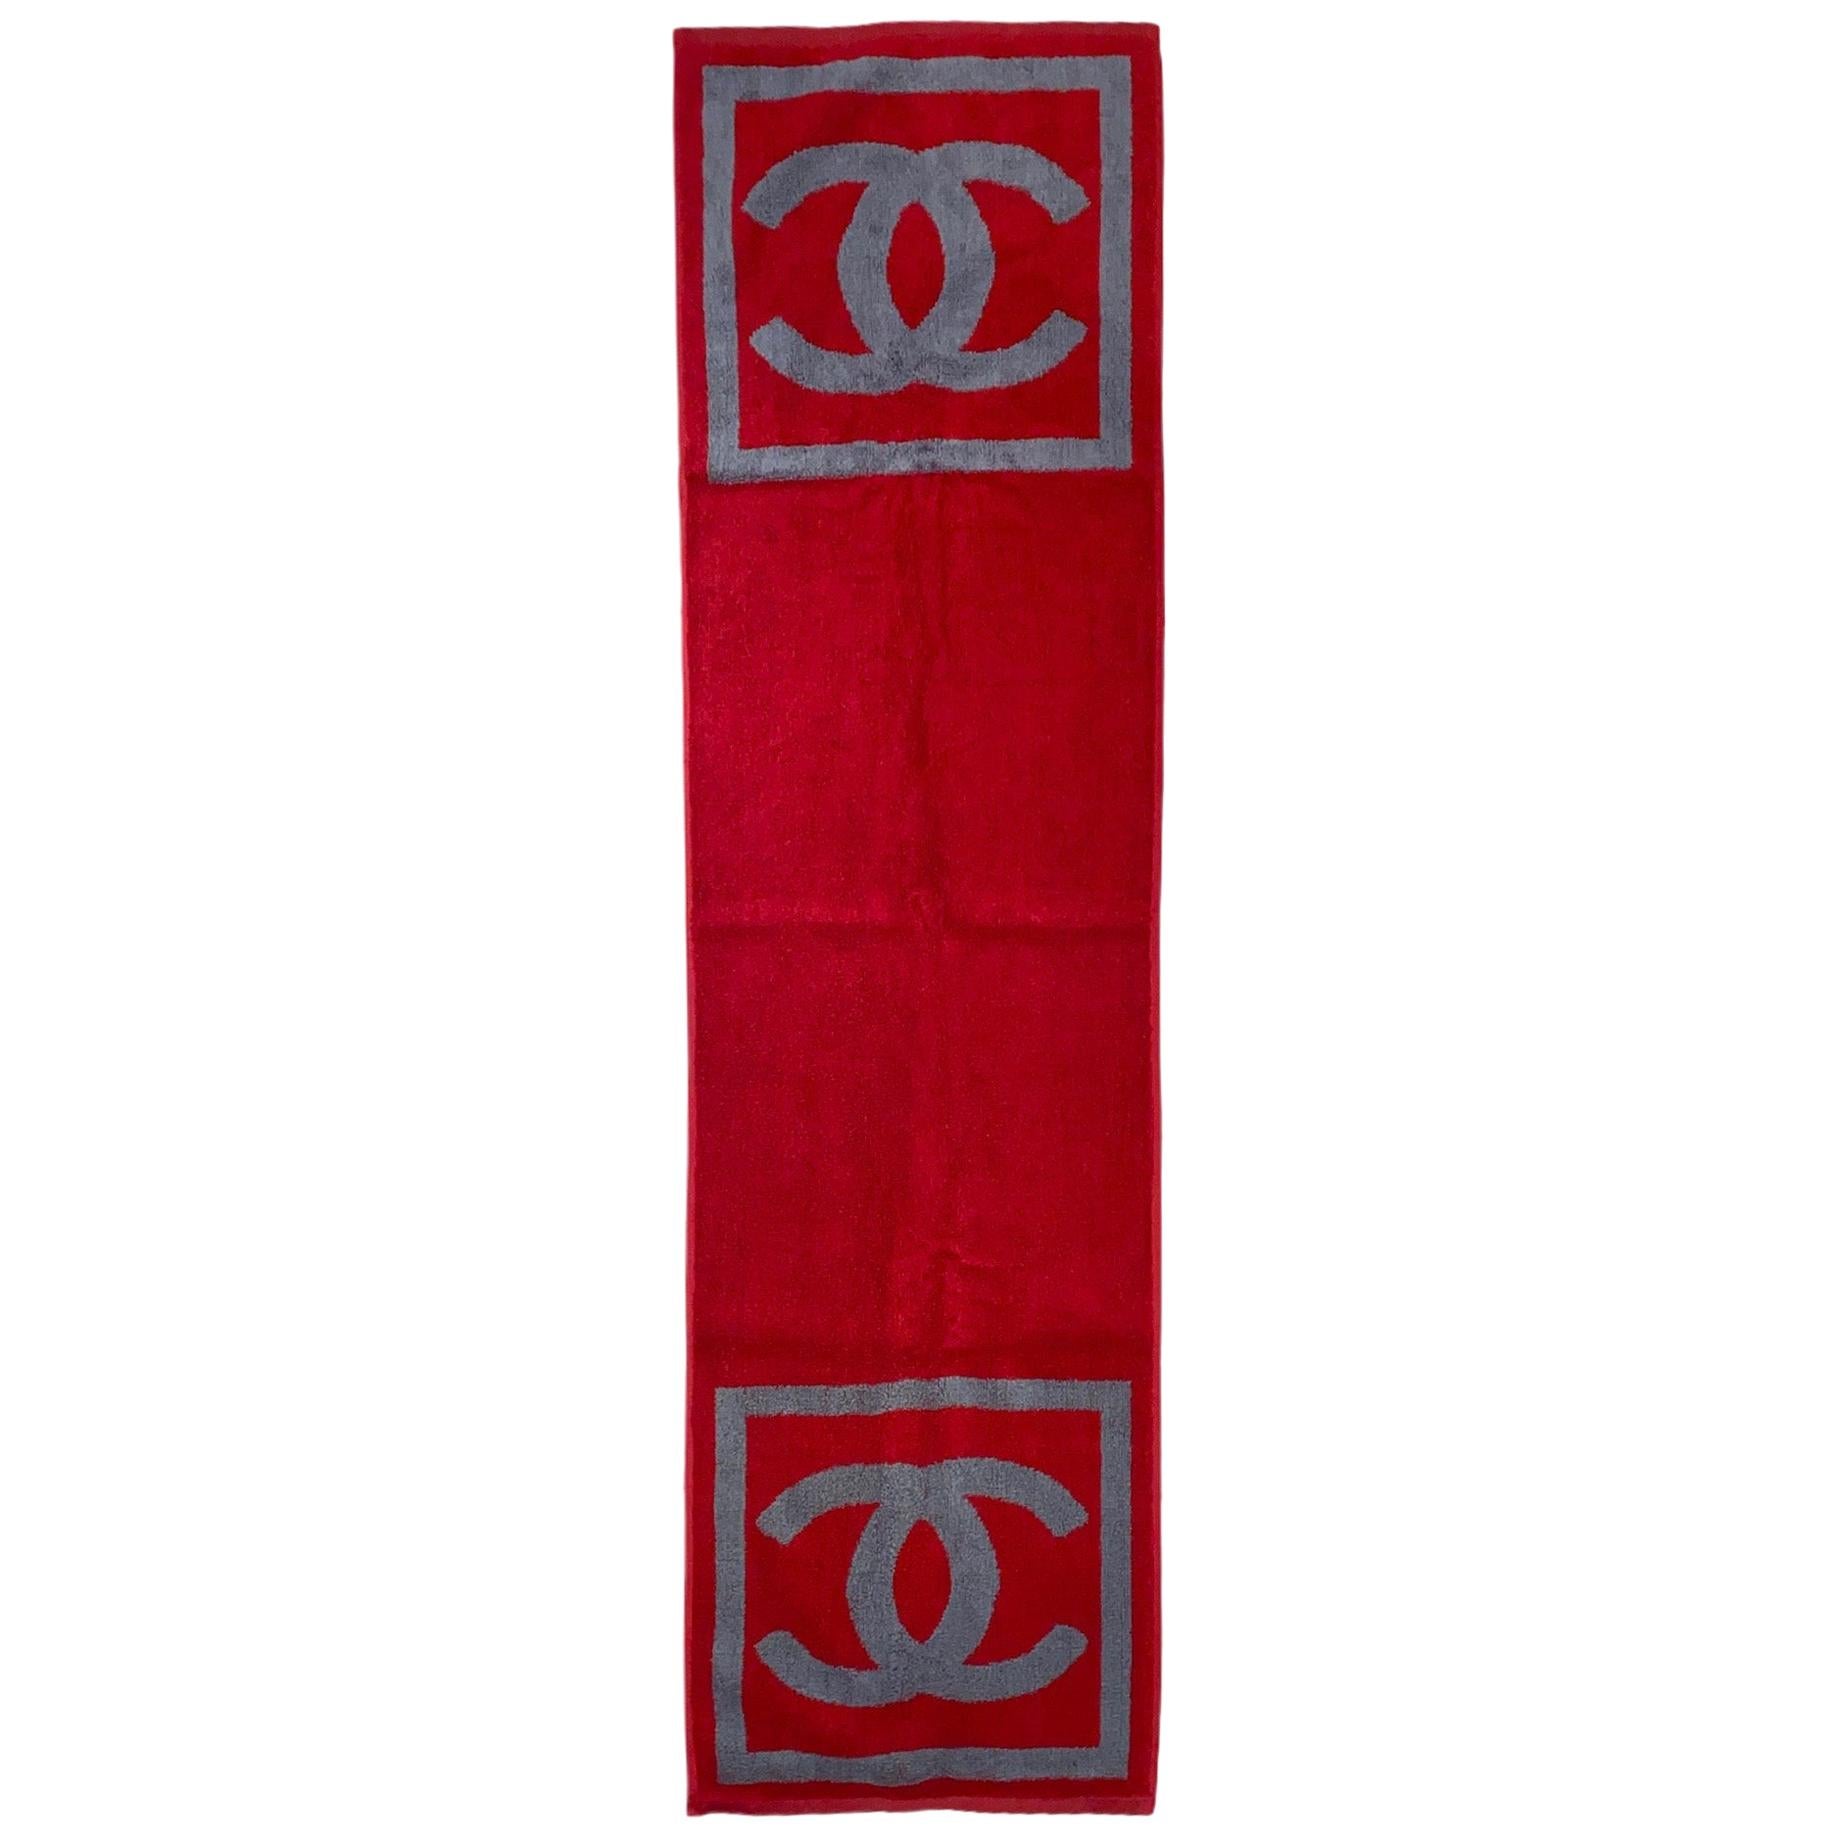 NEW Chanel CC Logo Signature Double Face Terry Cloth Beach Pool Sport Towel 